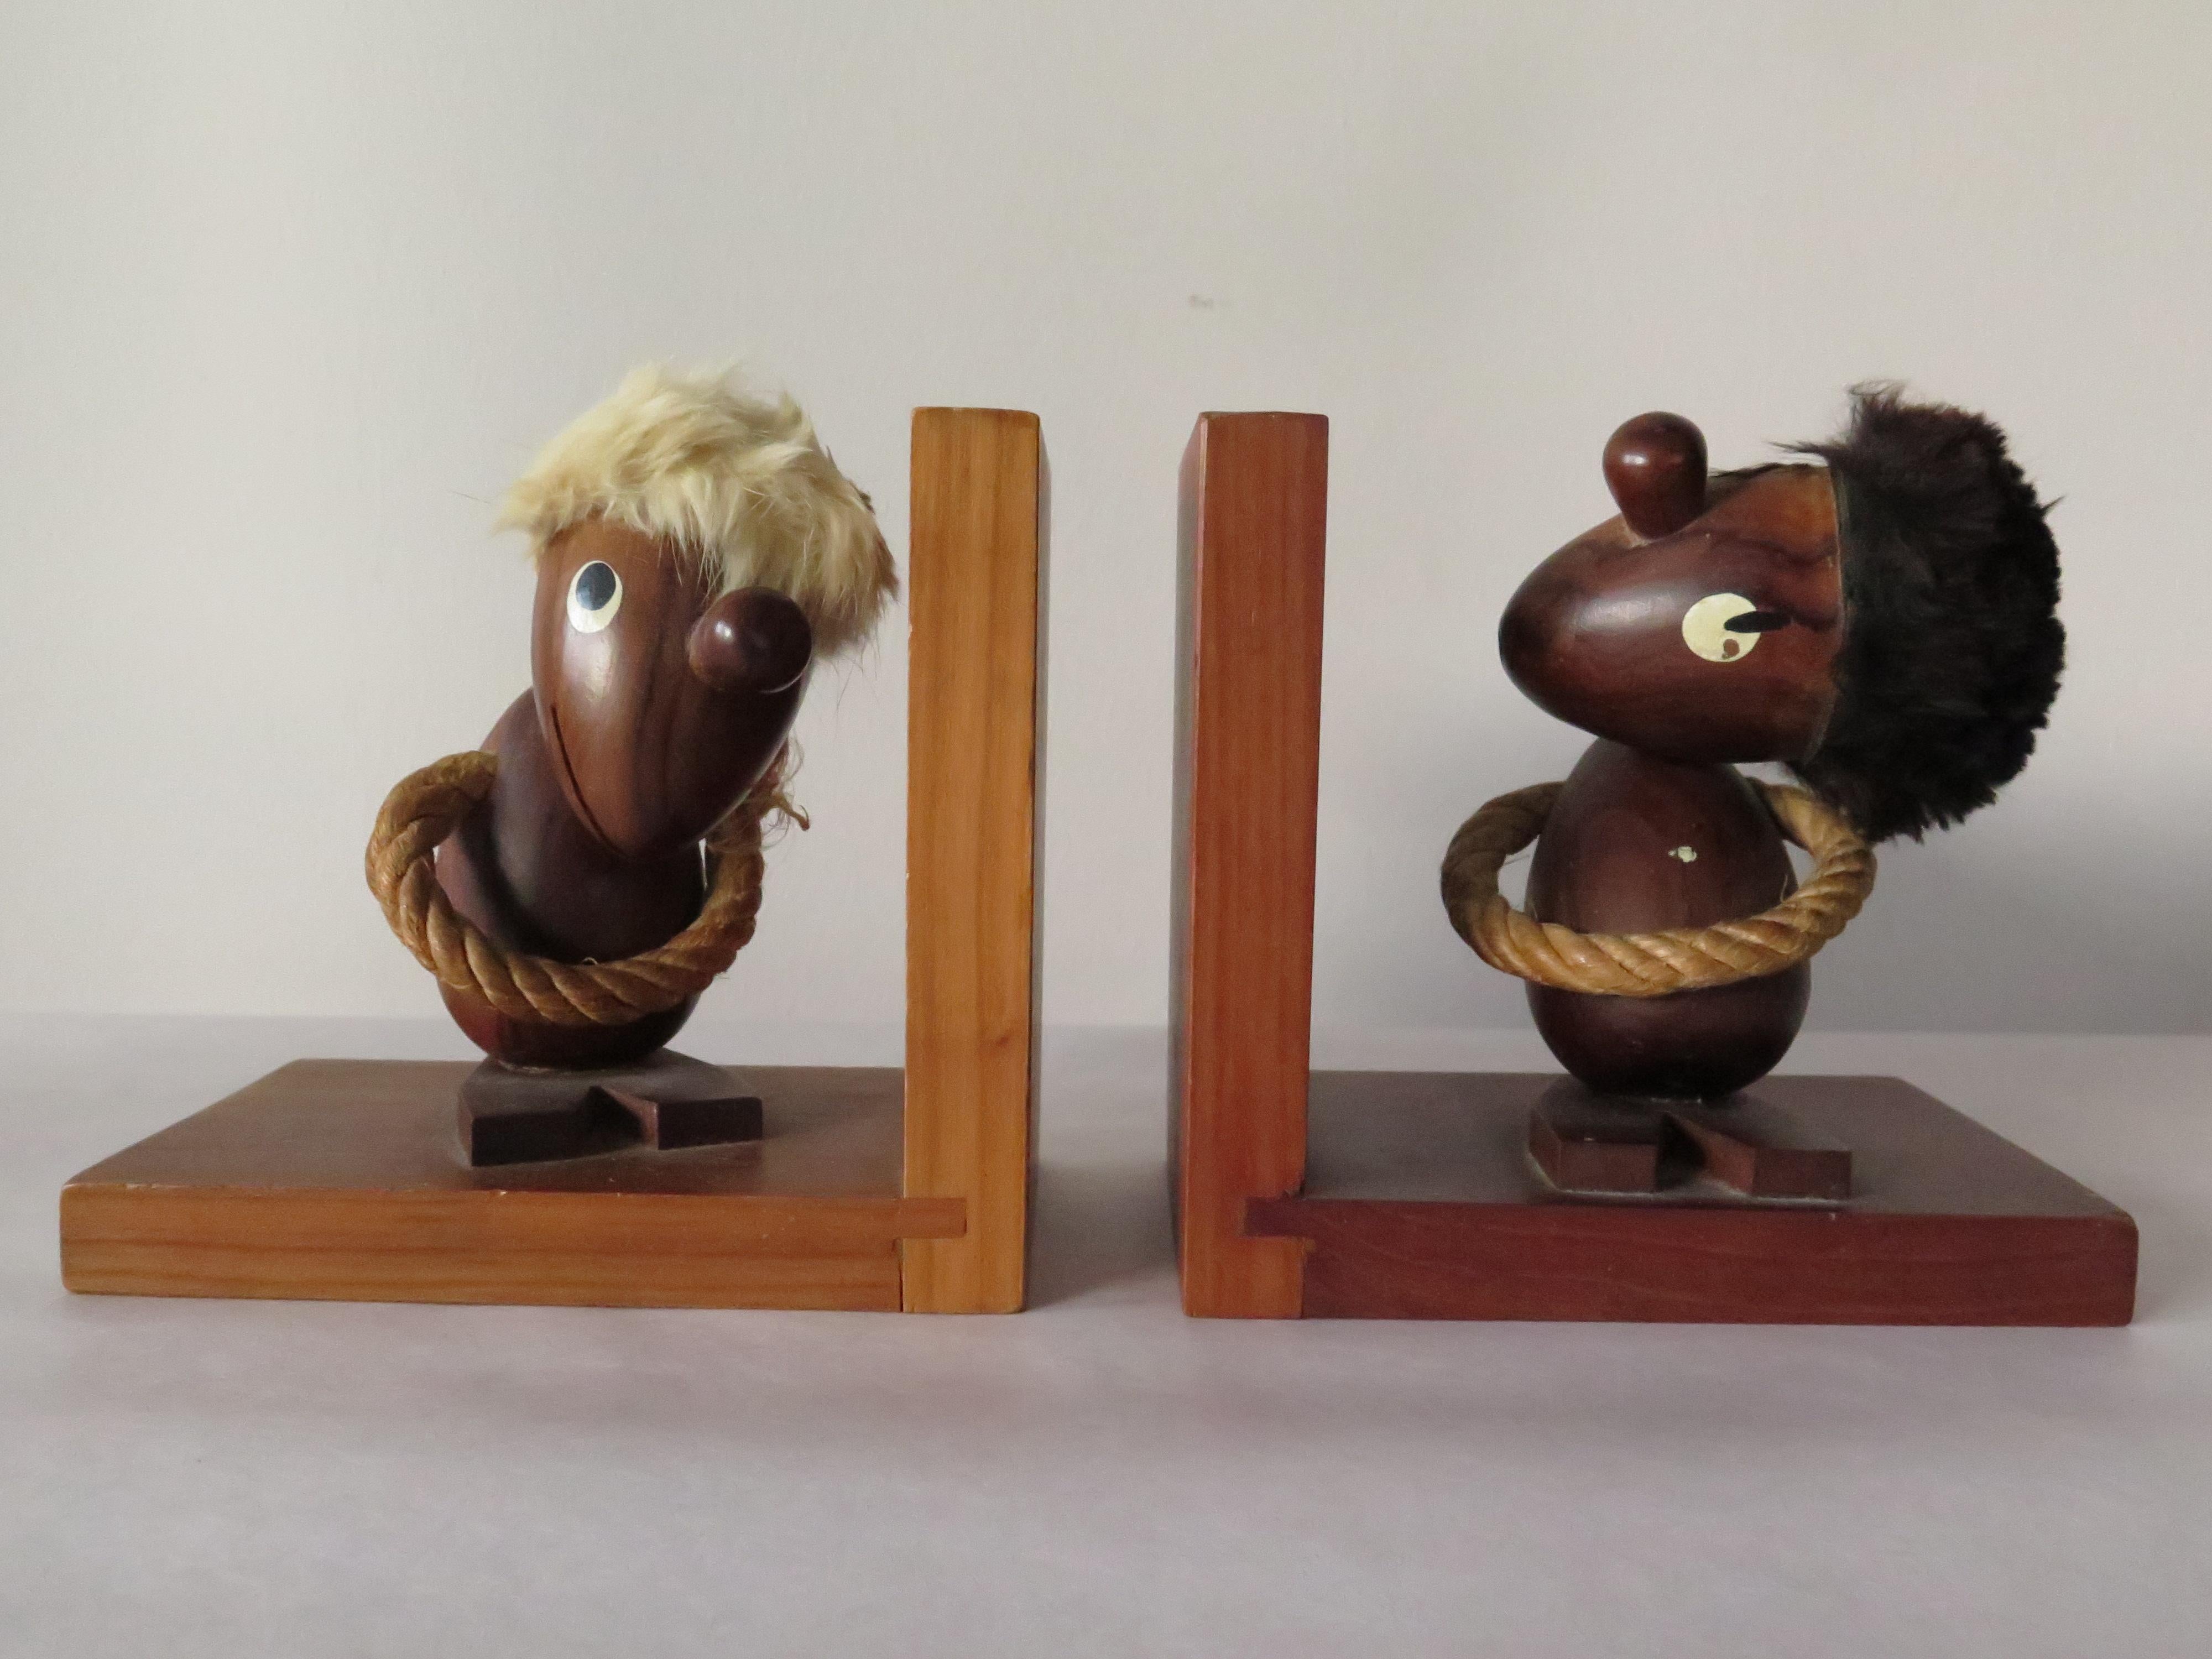 Funky Danish bookends-blond guy and dark guy caricatures! Well made and hand painted.